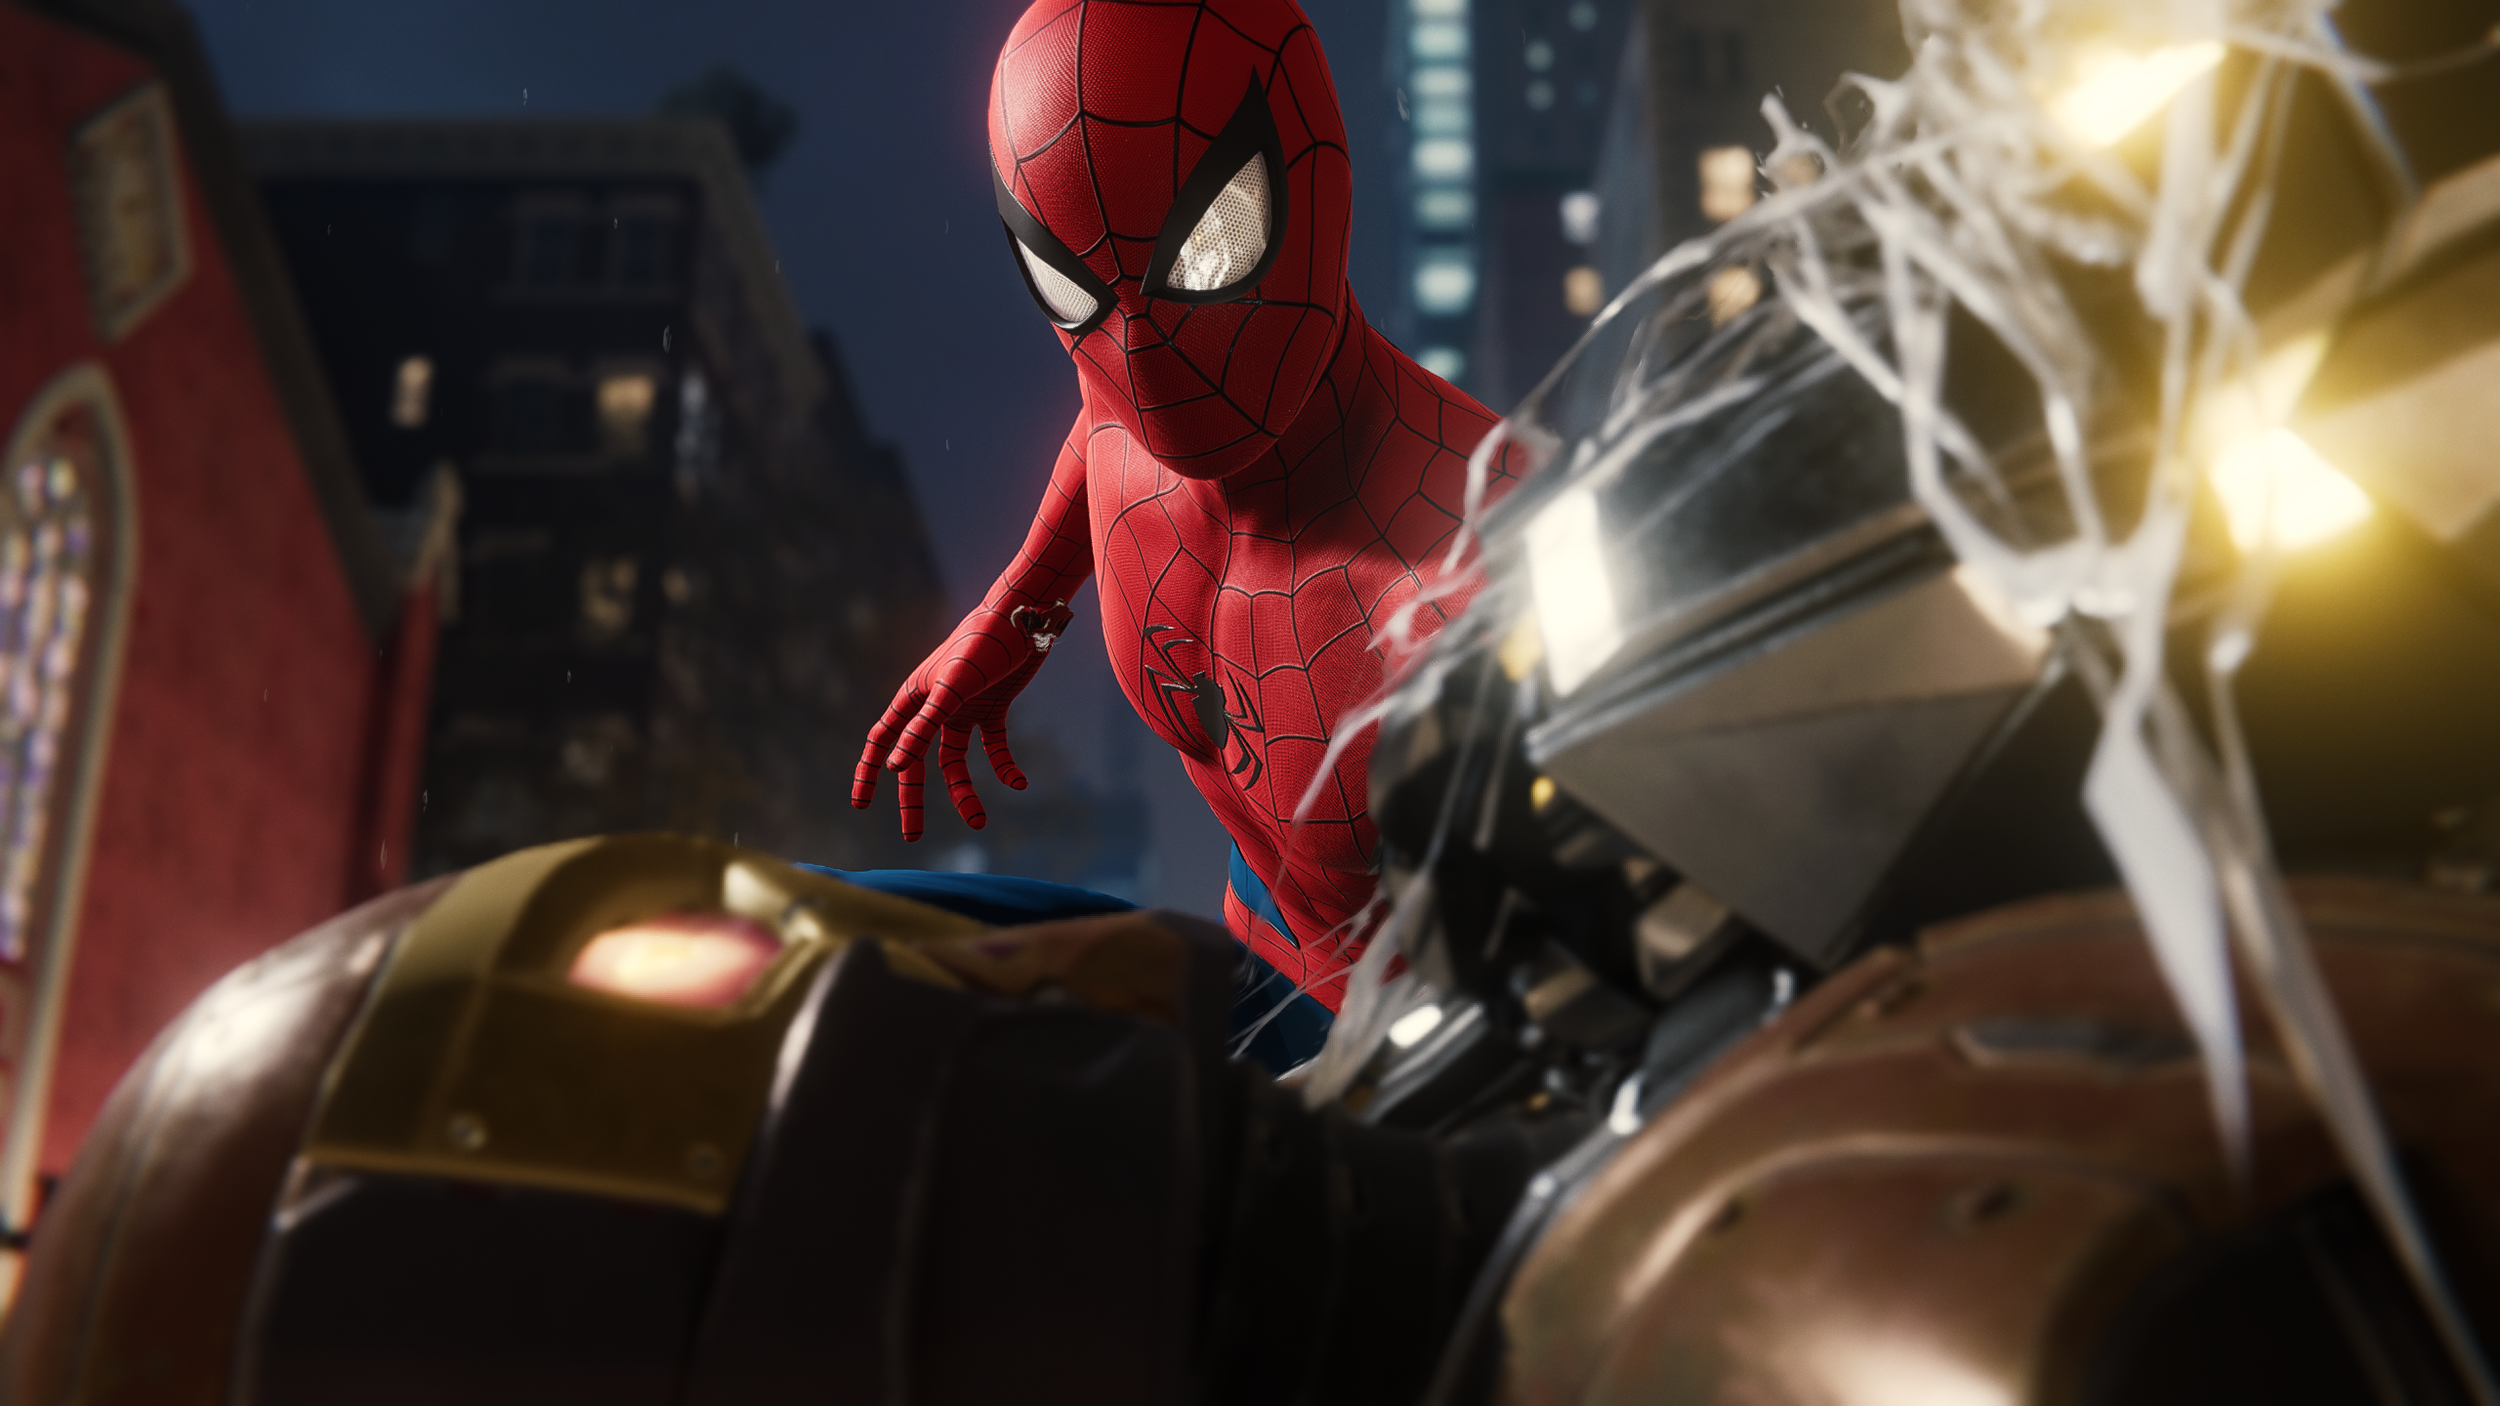 A review of Spider-Man Remastered on PC — Rigged for Epic